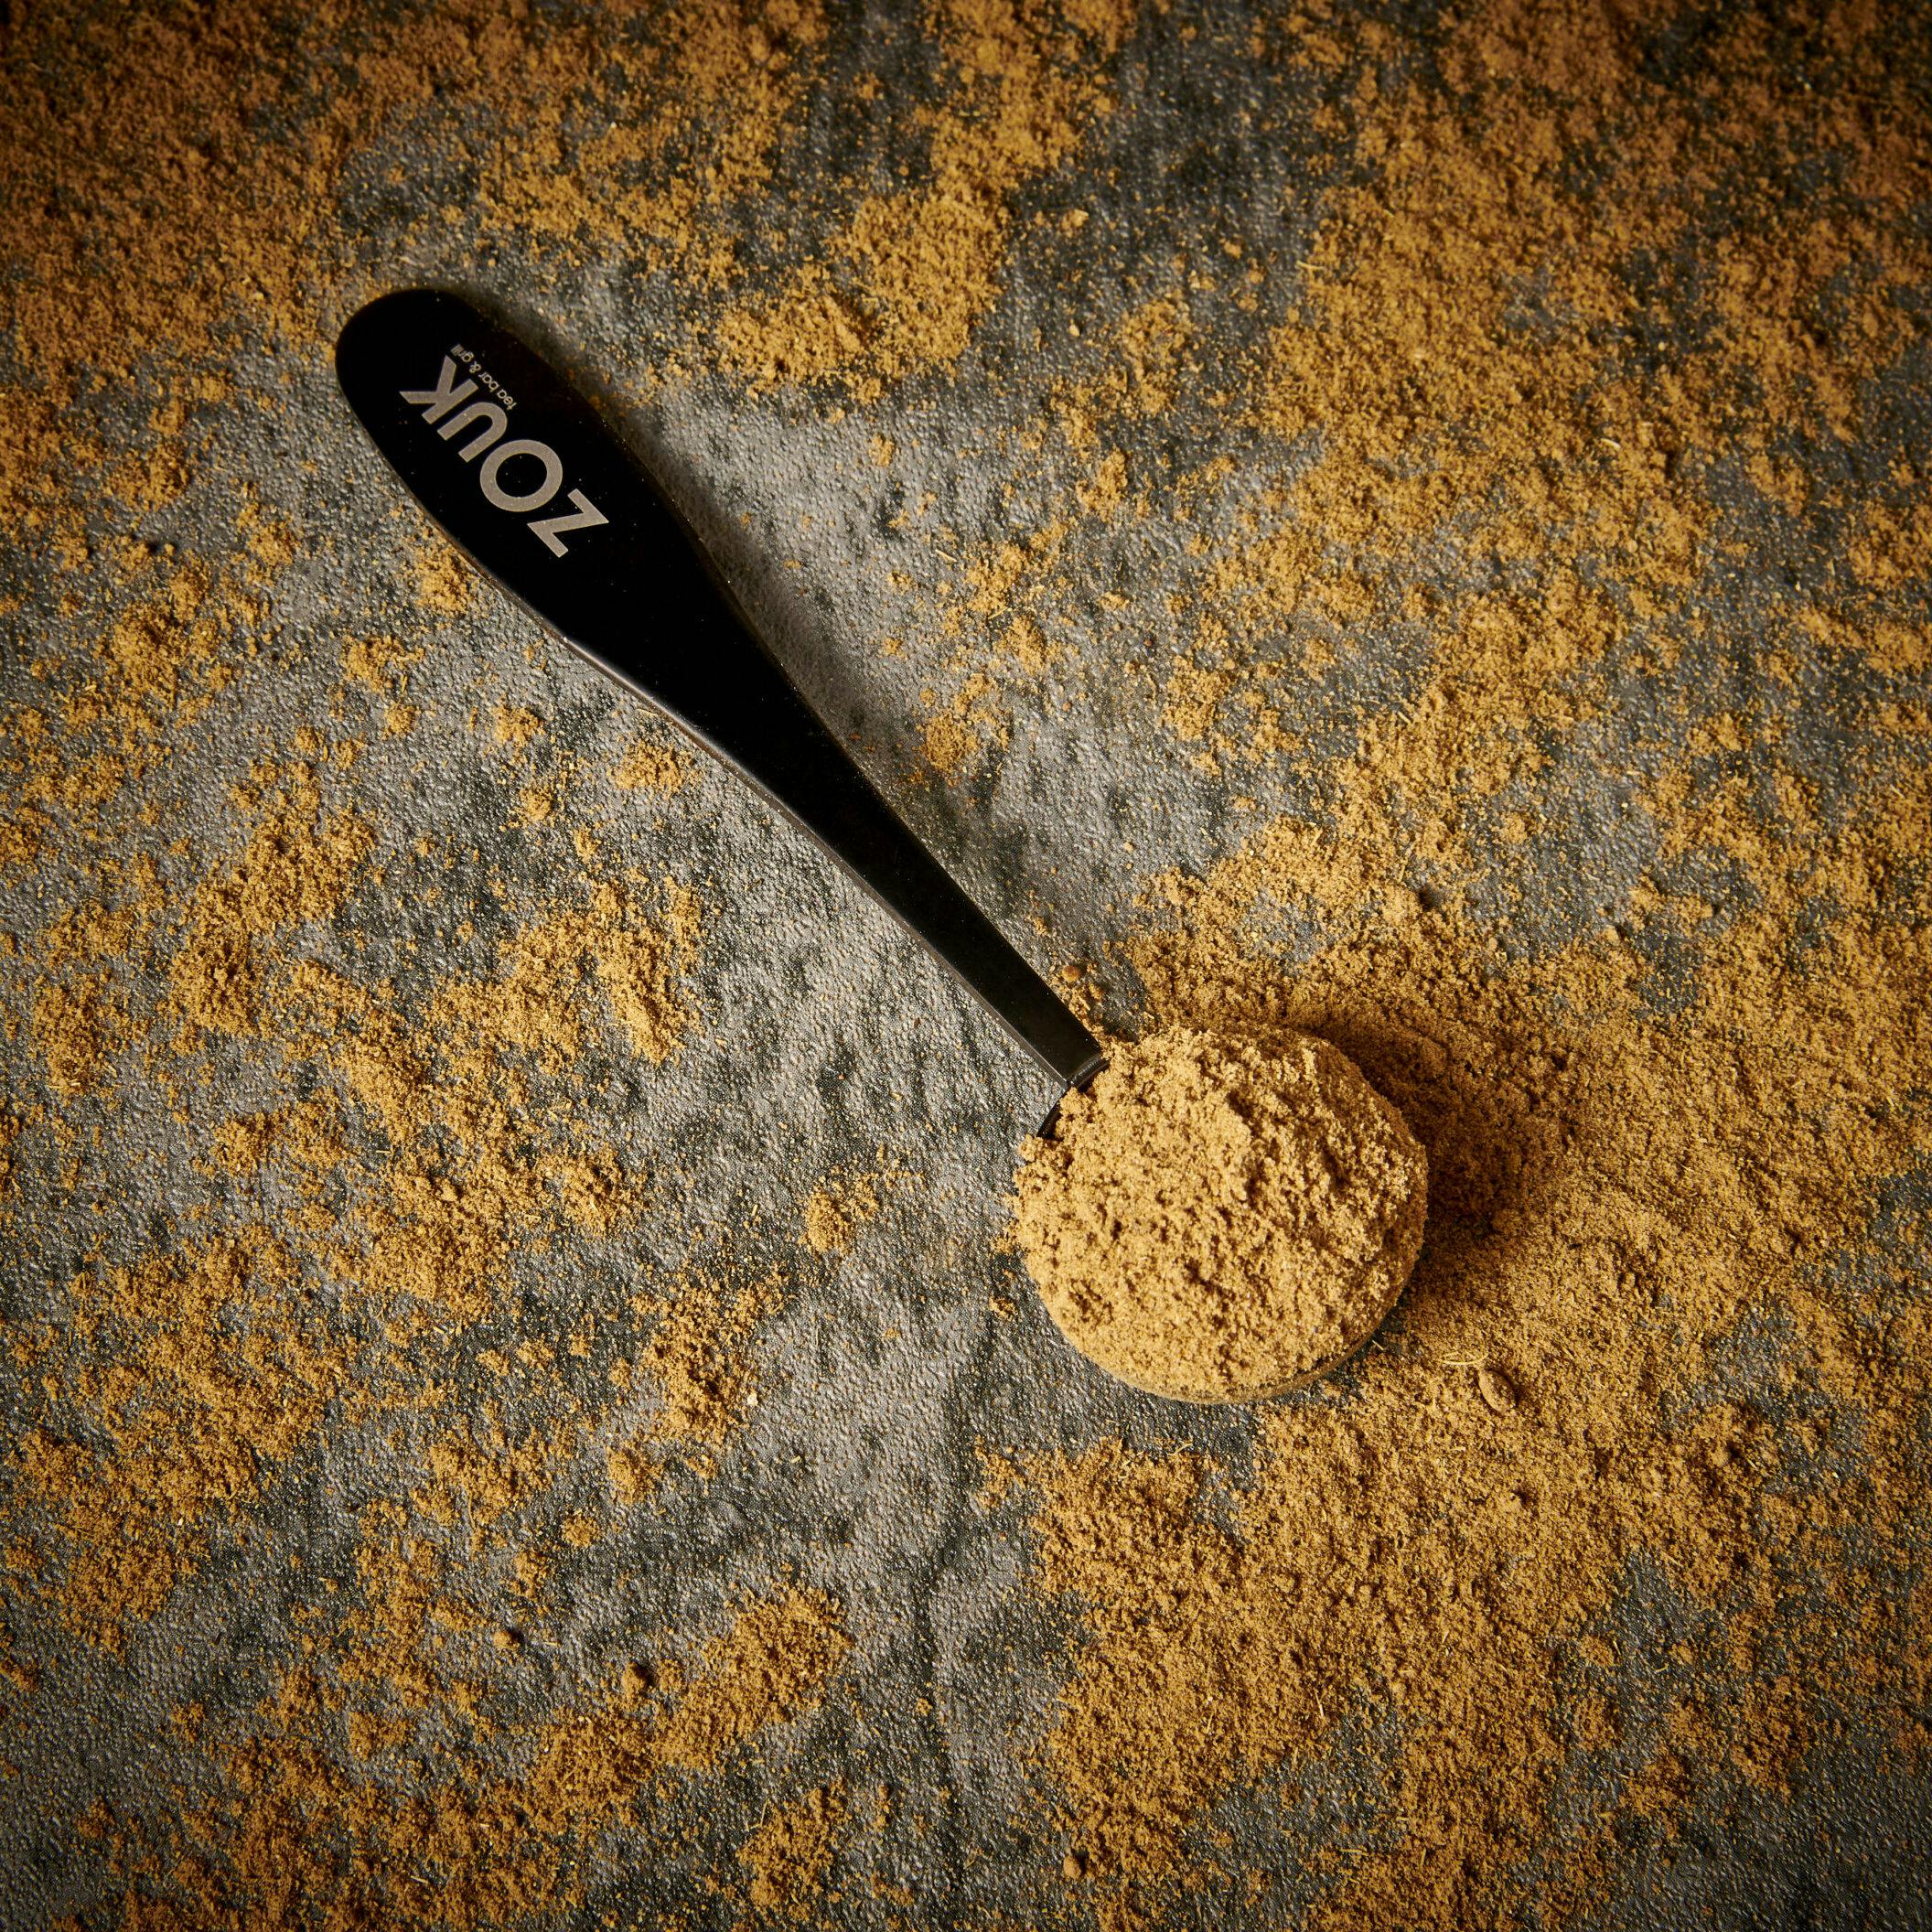 Zouk Masala Chai Spice Blend and Zouk engraved spoon